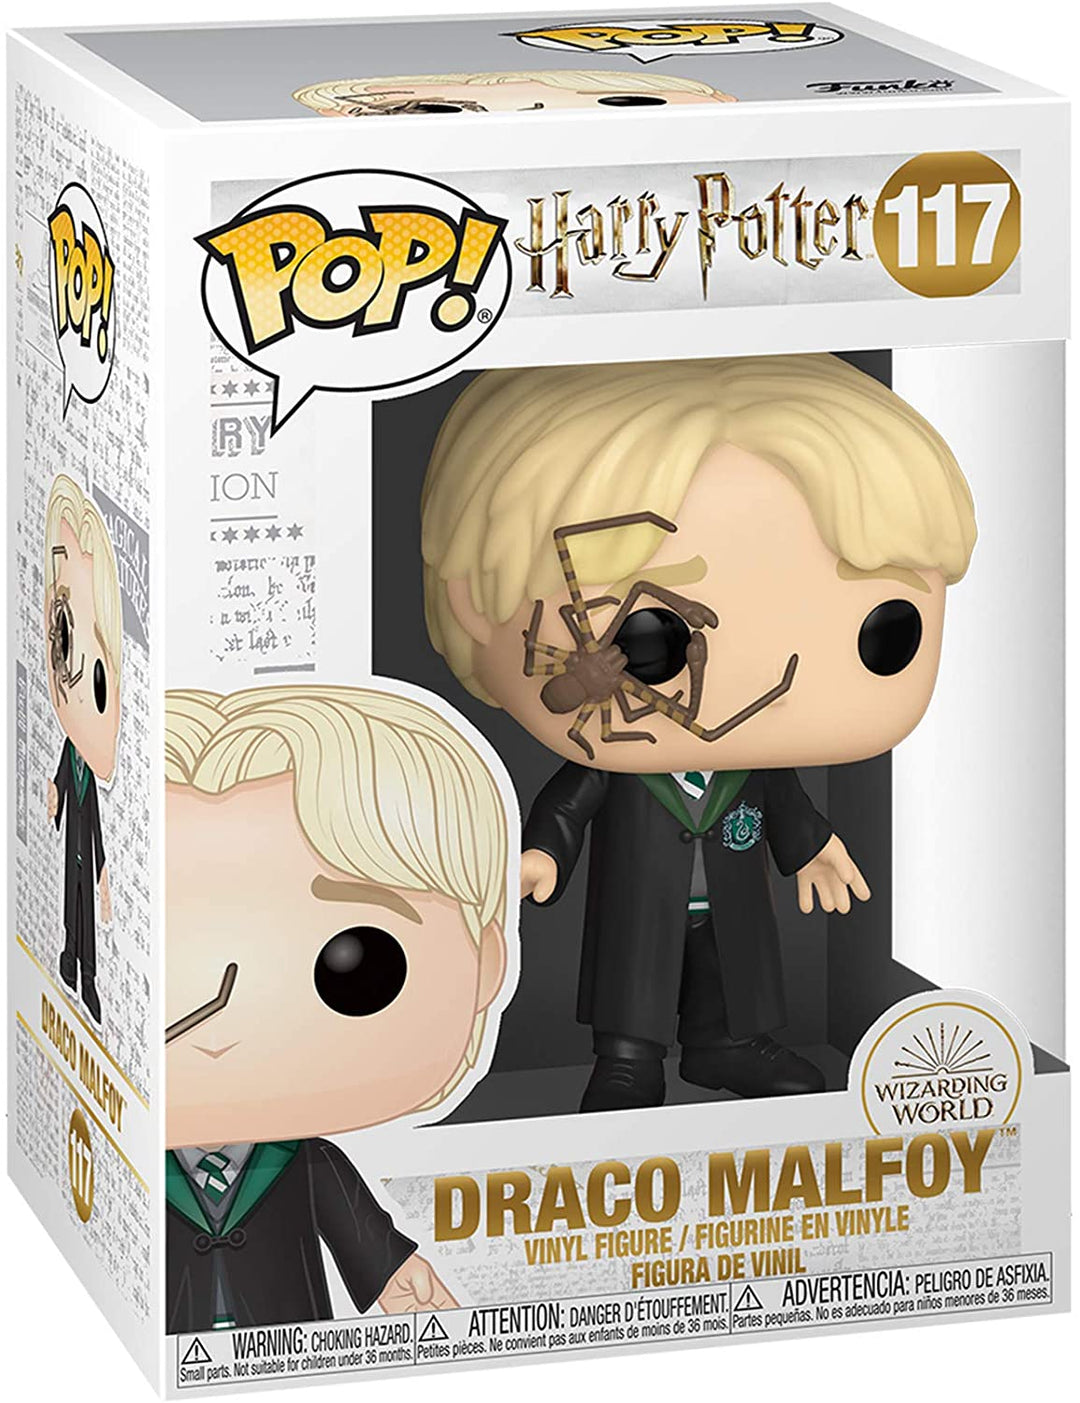 Funko Pop! Harry Potter: Harry Potter - Malfoy With Whip Spider Vinyl Figure